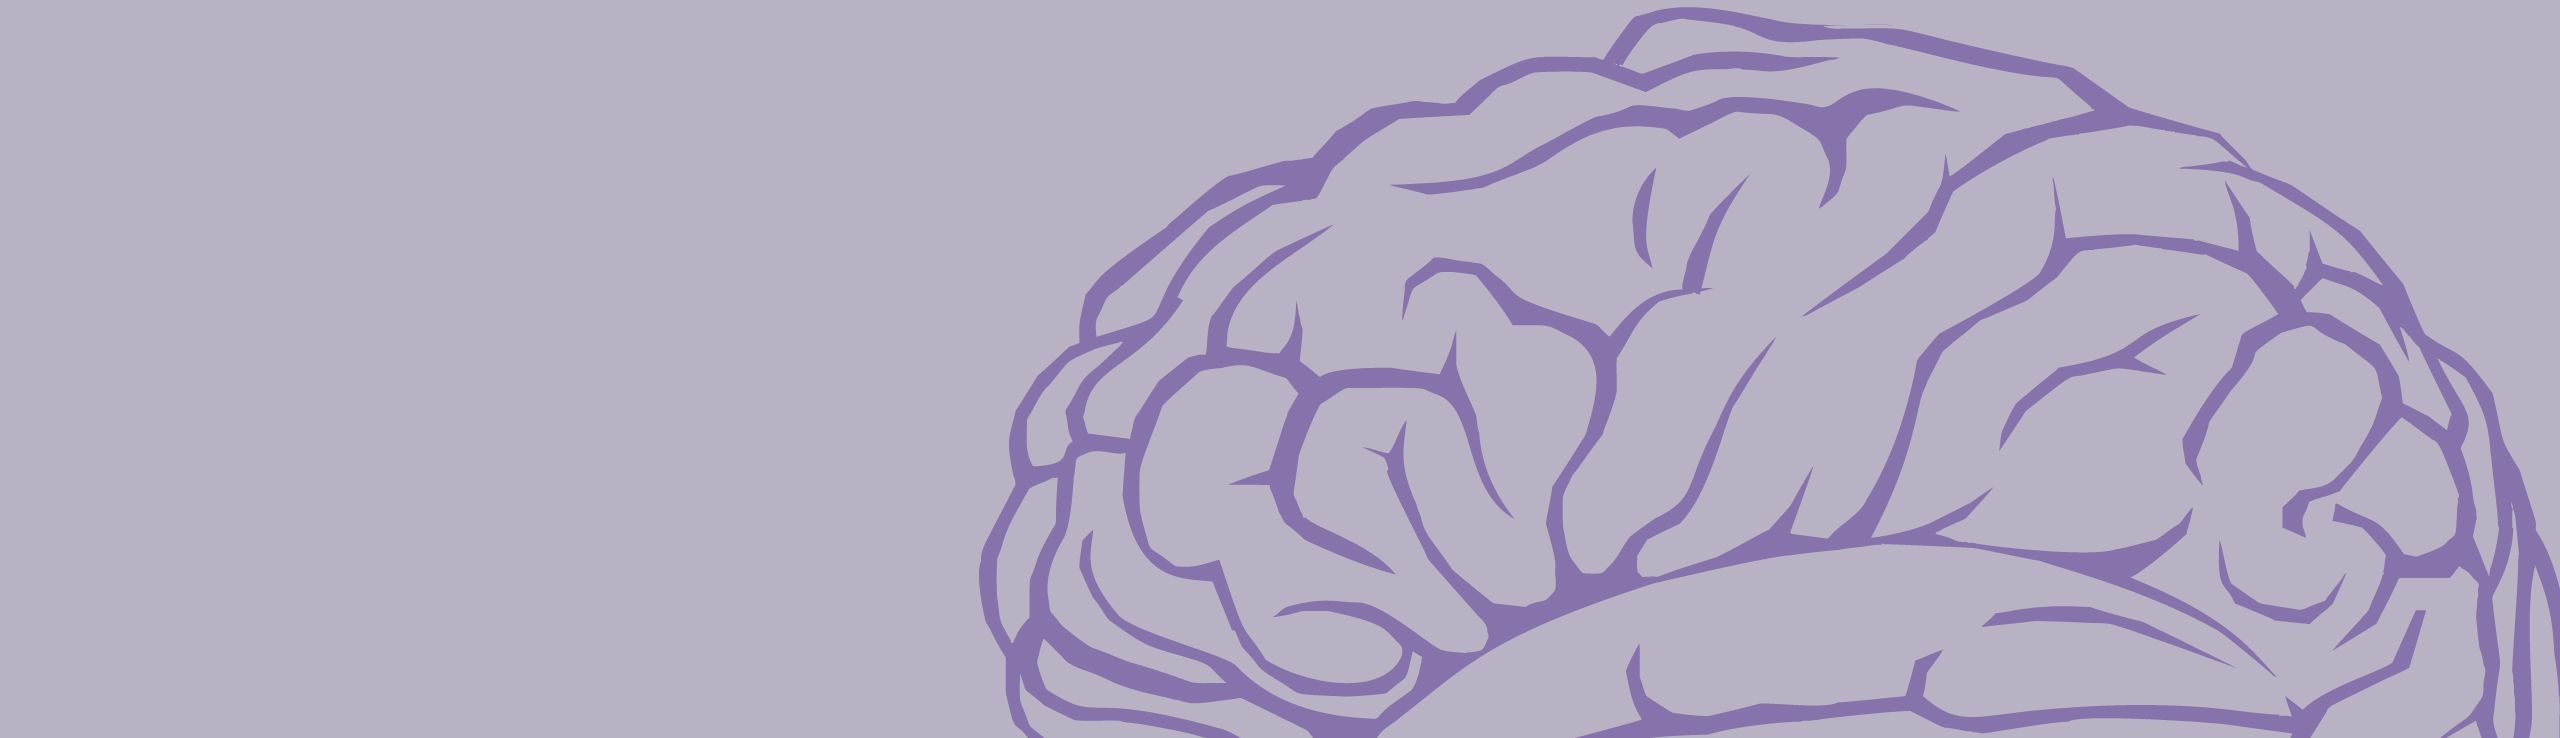 Illustration of a brain on a lavender background.